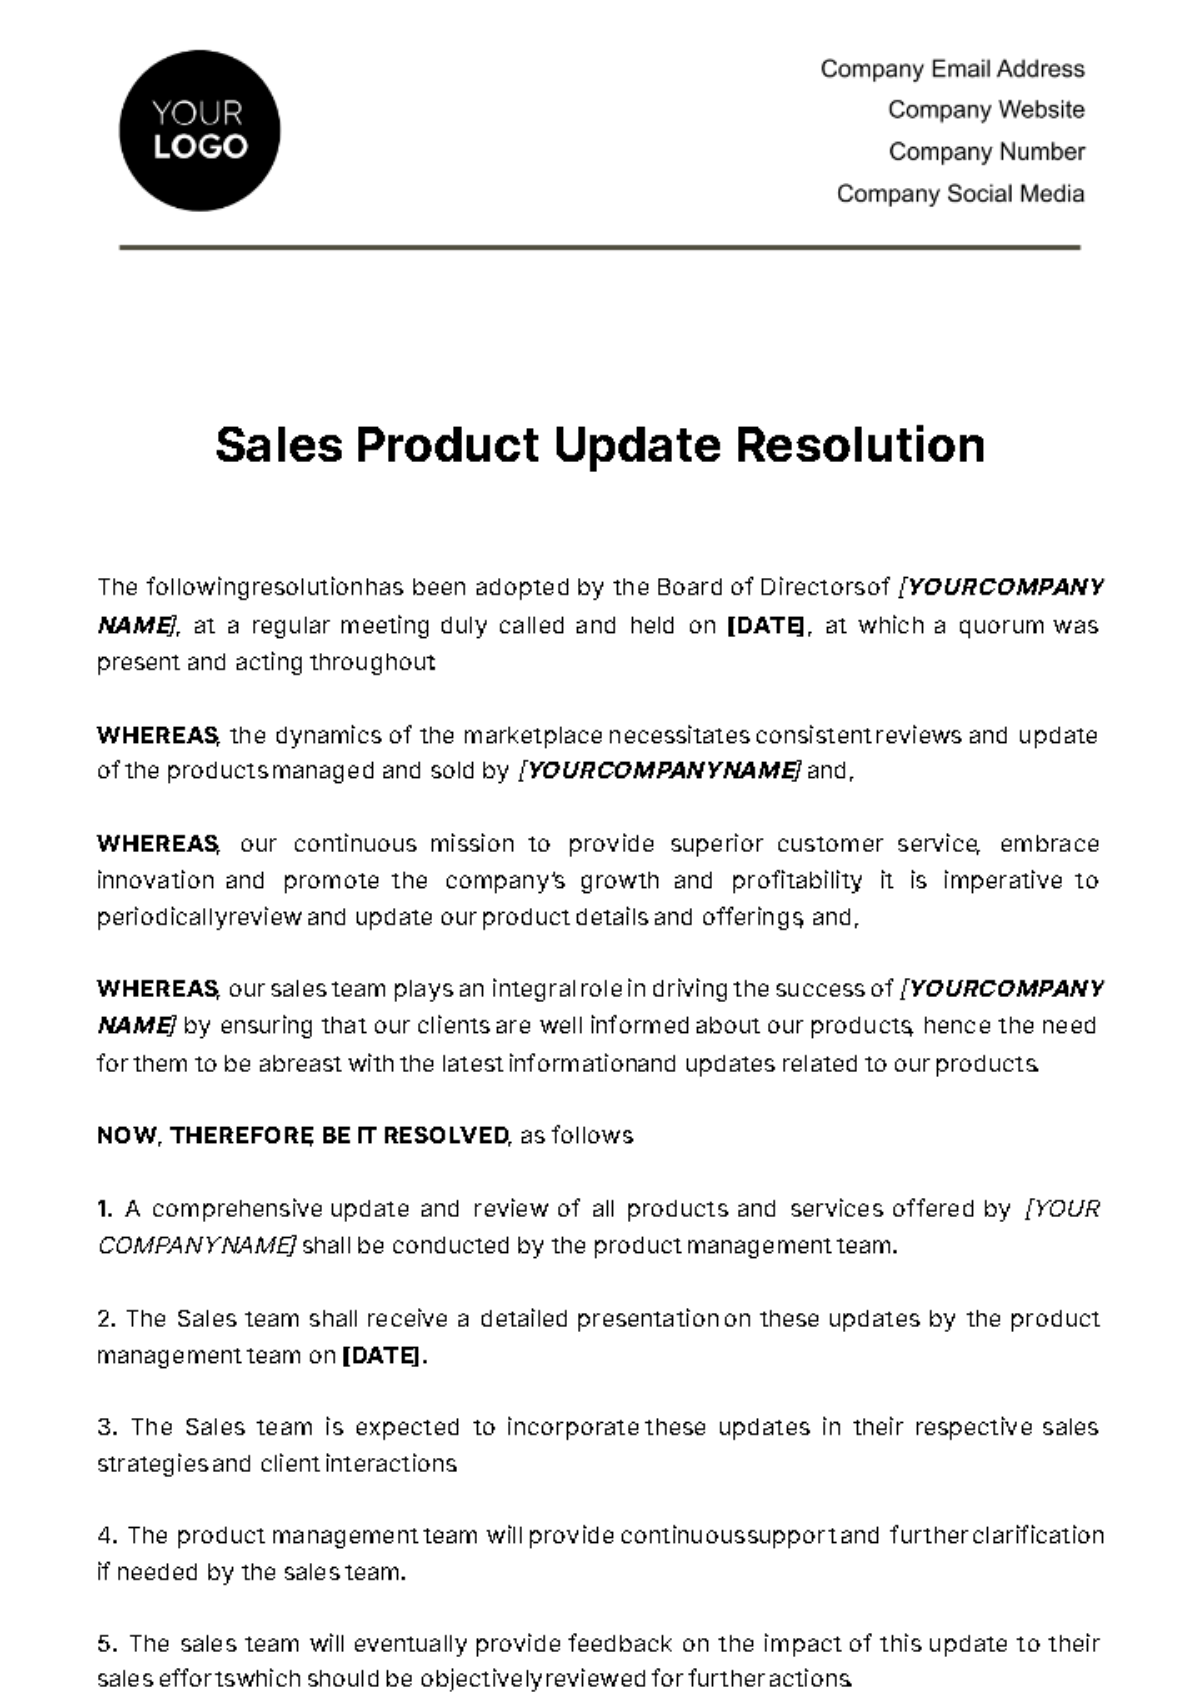 Free Sales Product Update Resolution Template